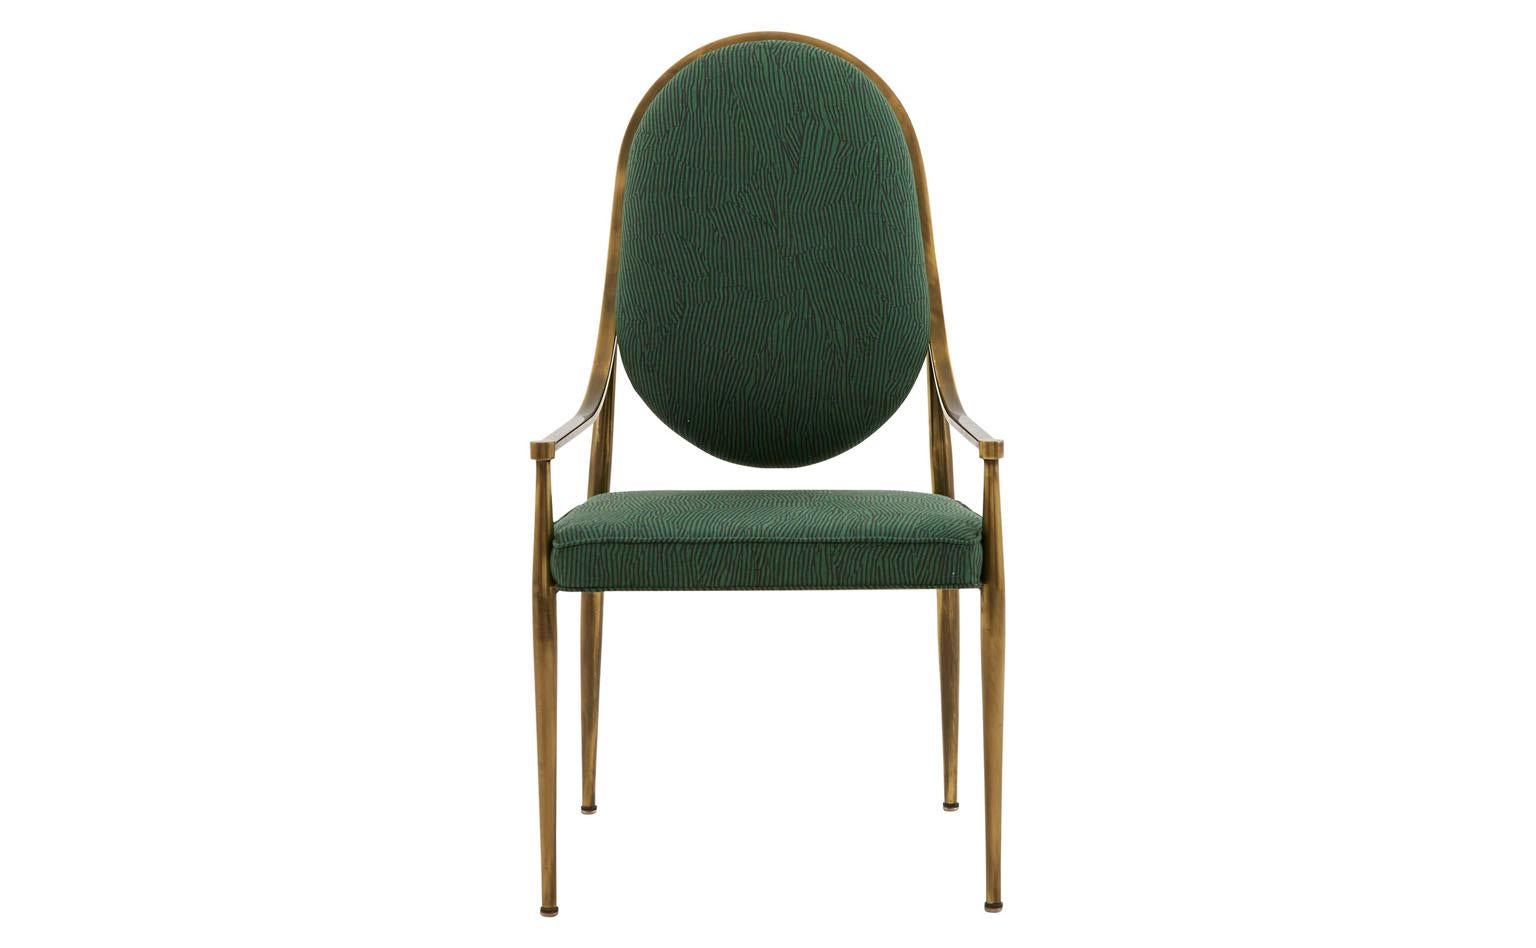 Founded in the late 1940s, Mastercraft Furniture brought sophisticated, European-inspired design to America throughout the mid-20th century. Our Vintage Brass Mastercraft Dining Chair features an elegant, curved brass frame, which has taken on a